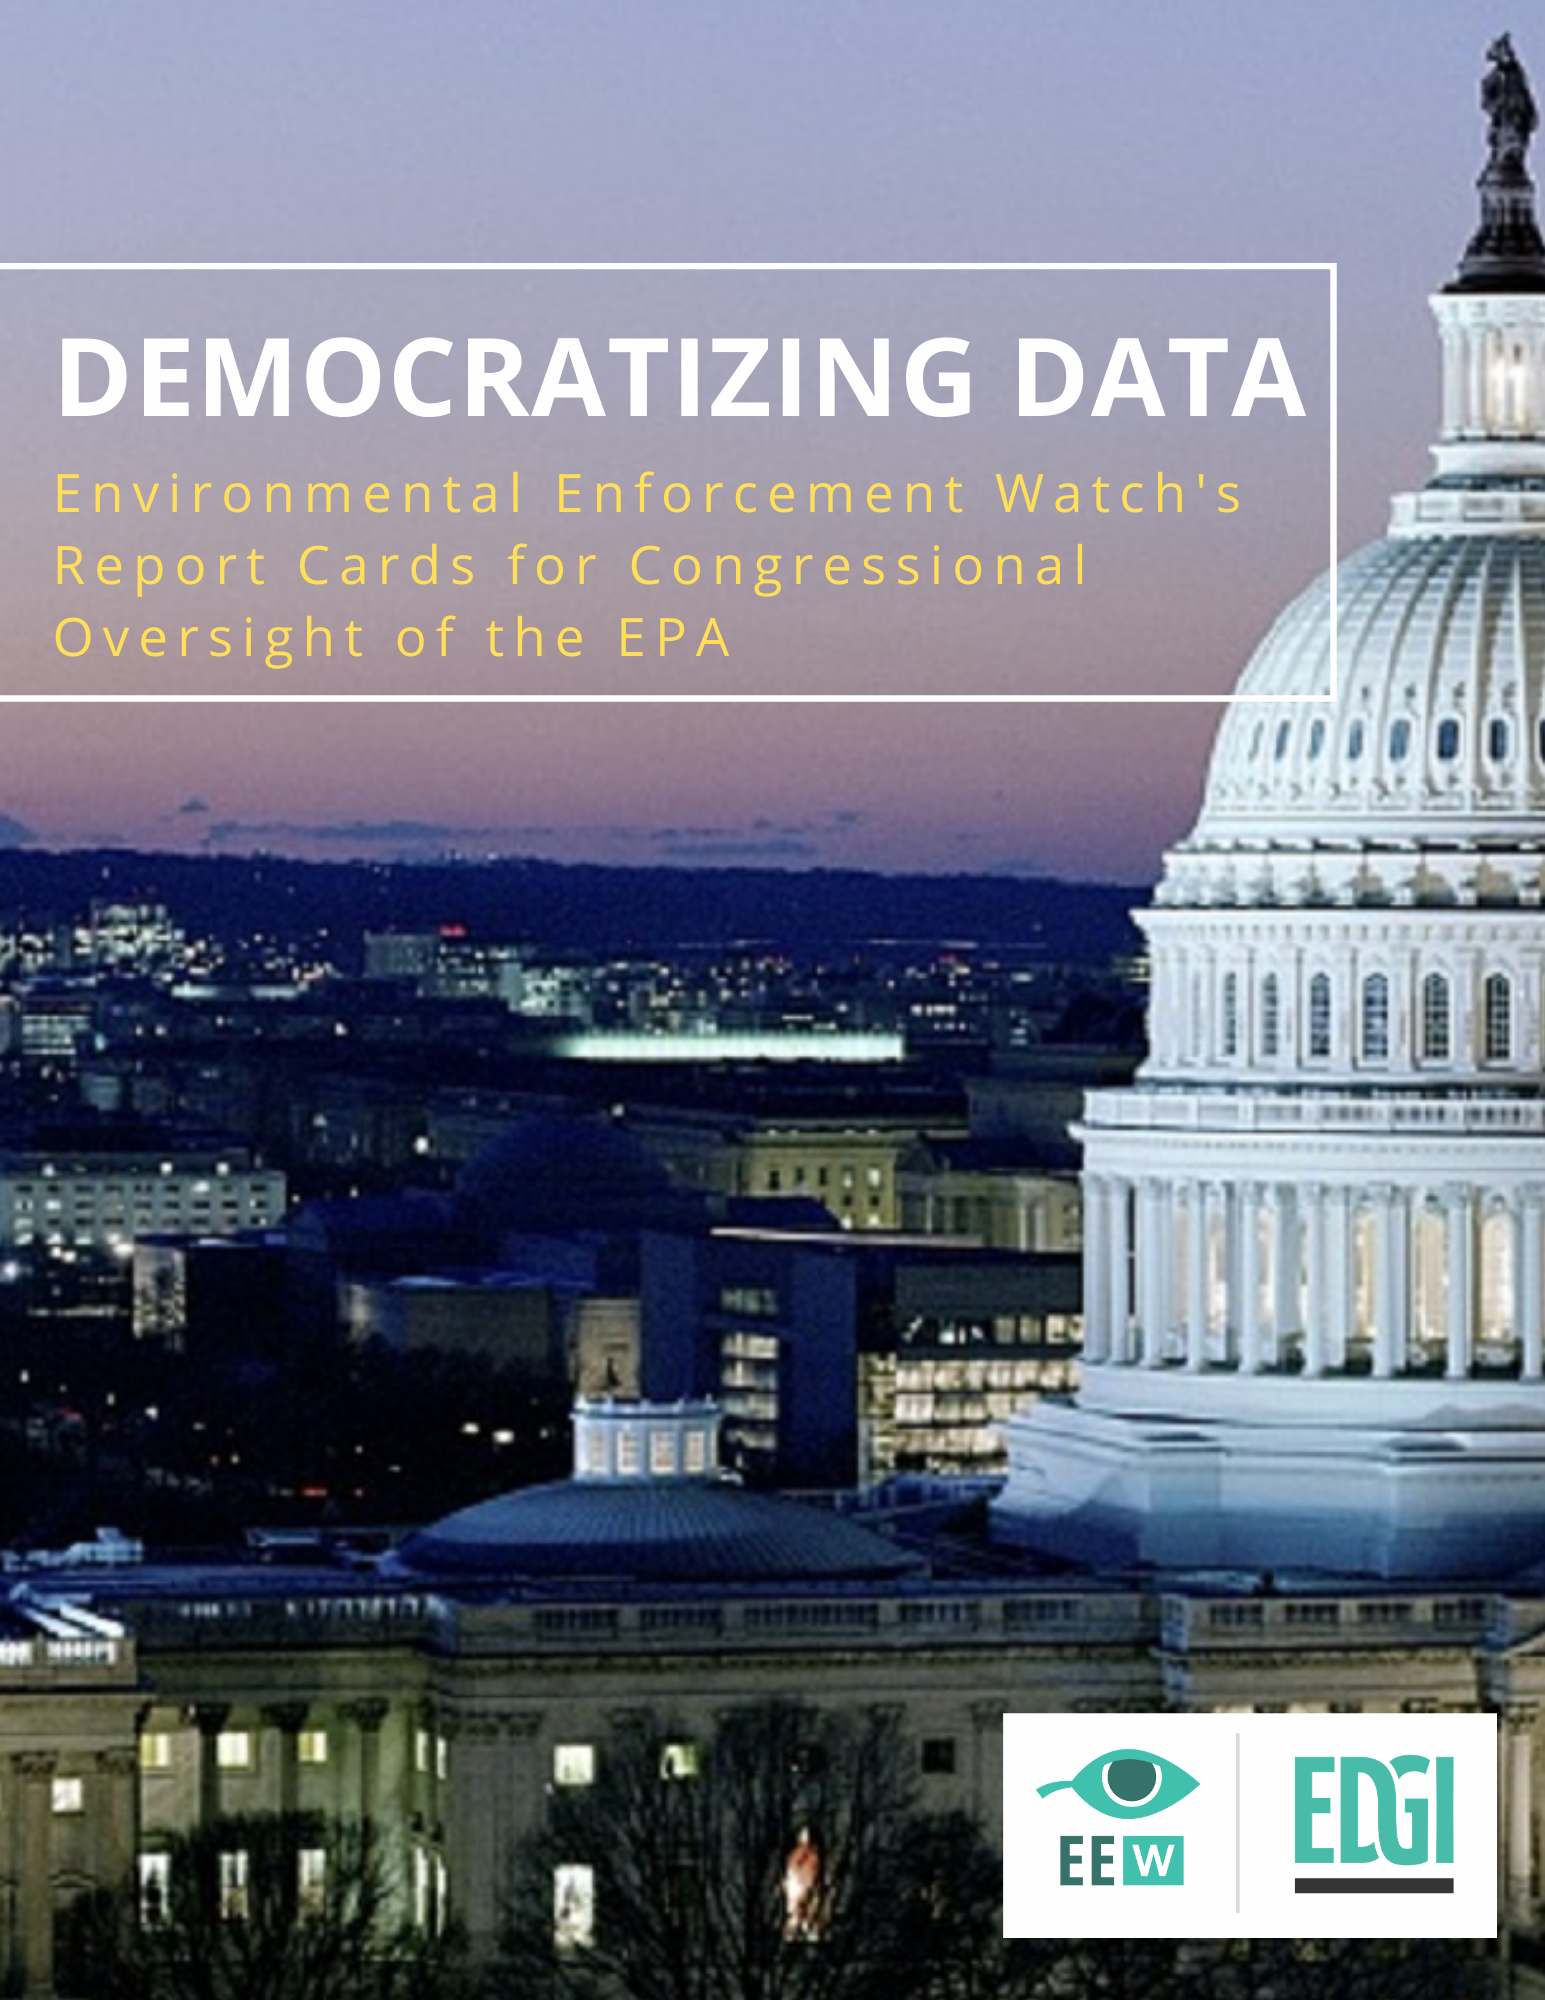 Democratizing Data: Environmental Enforcement Watch’s Report Cards for Congressional Oversight of the EPA